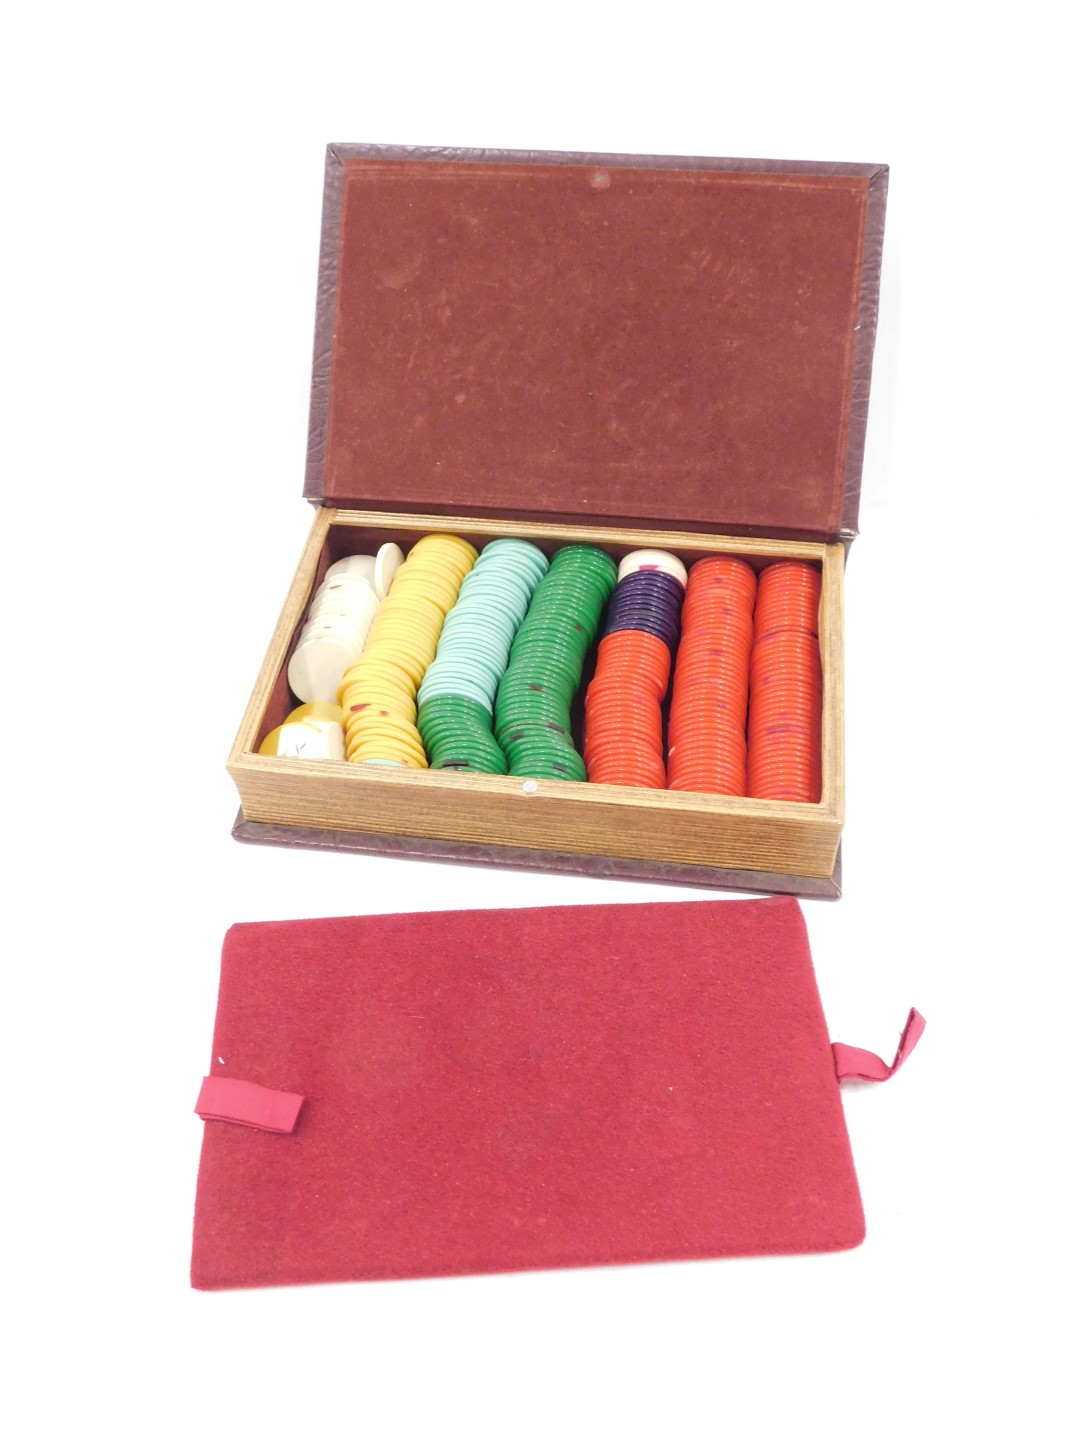 A collection of coloured plastic or Bakelite gaming counters, housed in a box made to simulate a boo